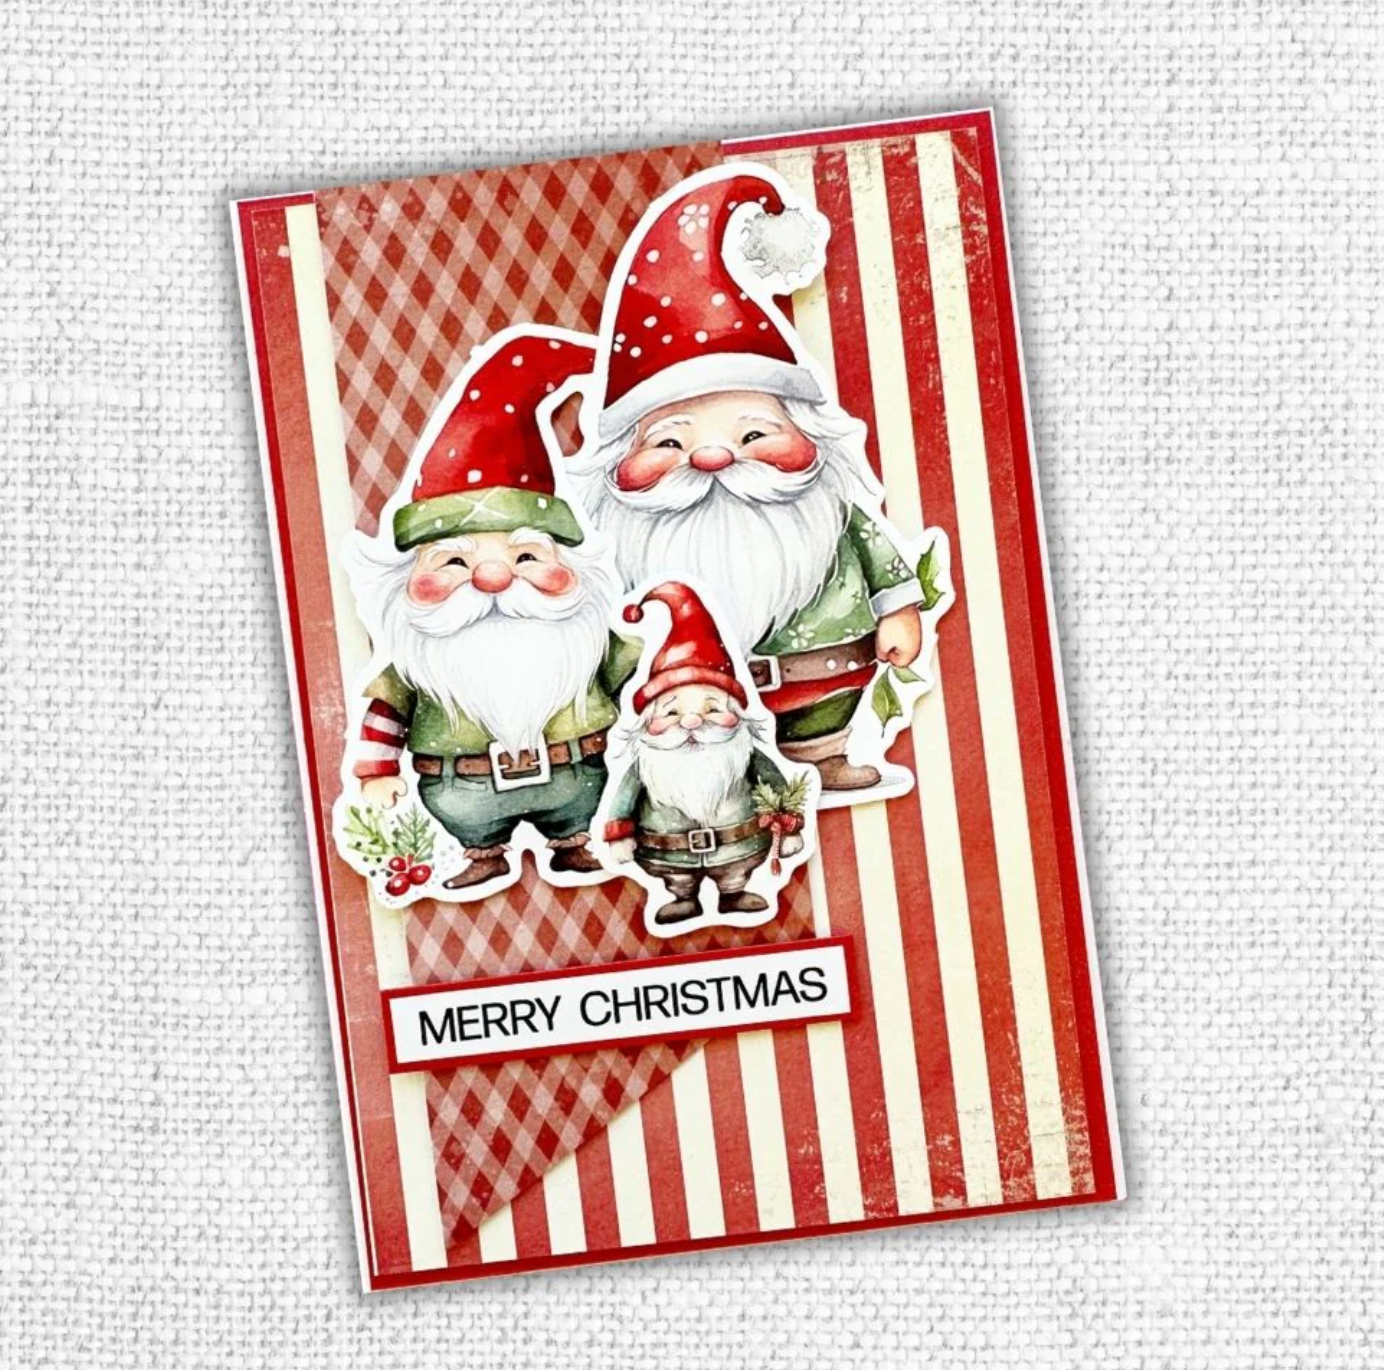 A Wonderful Christmas Double-Sided Cardstock 12X12-Dark Red/ Black